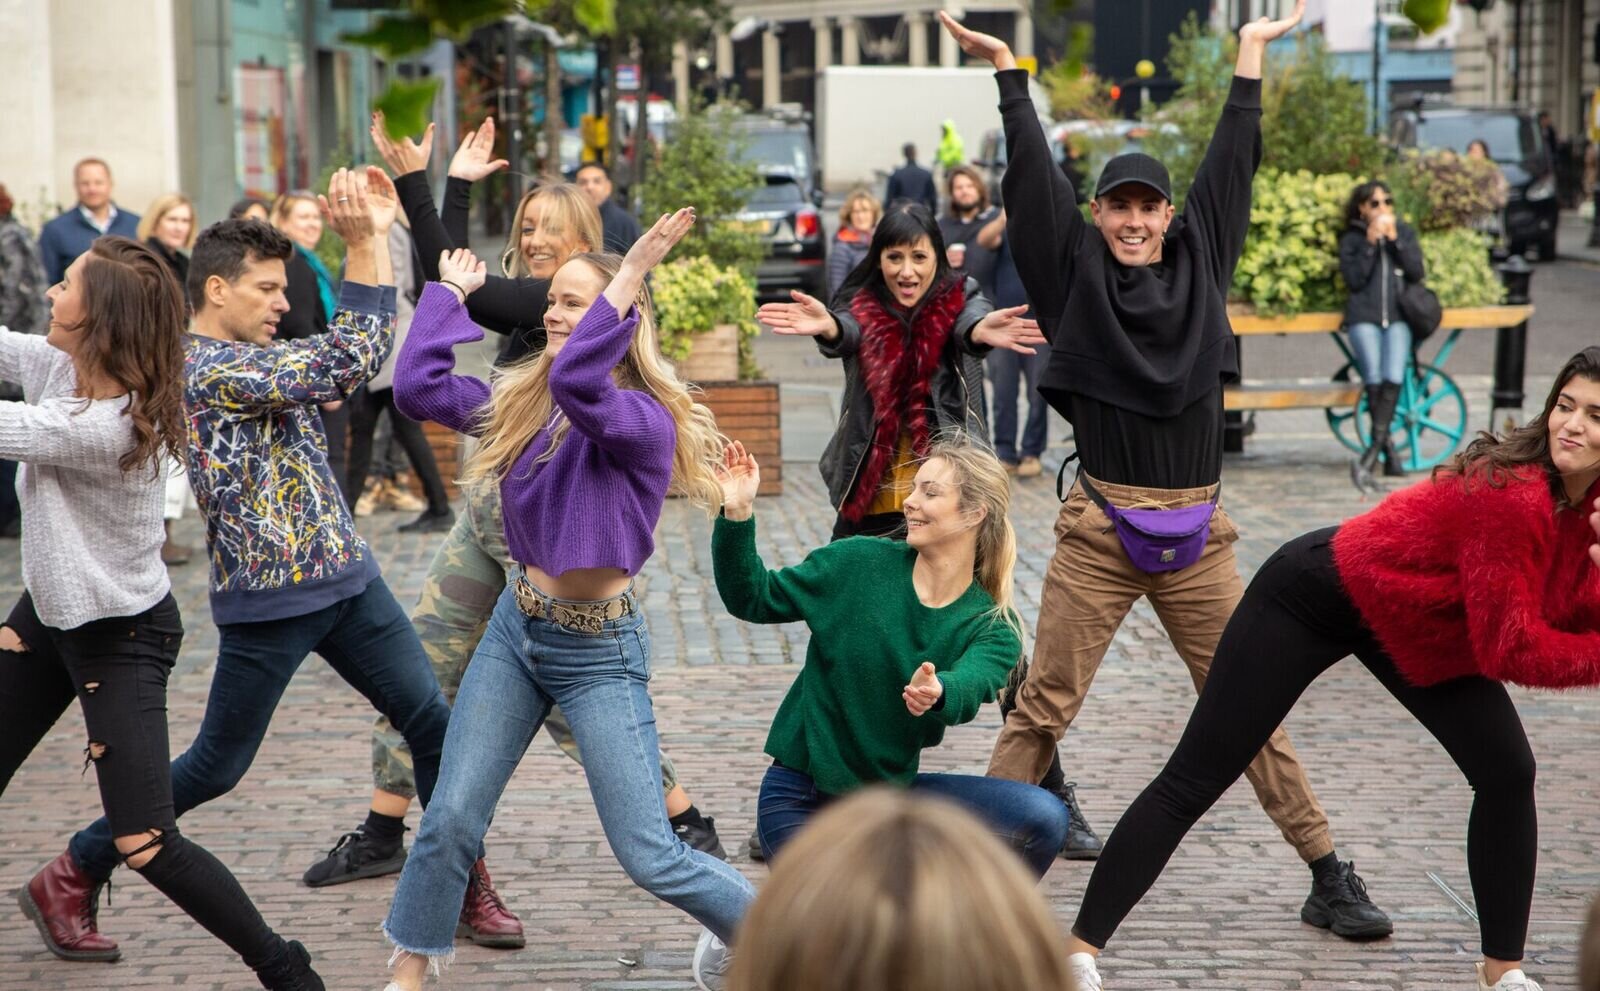 Flash mob performing at event